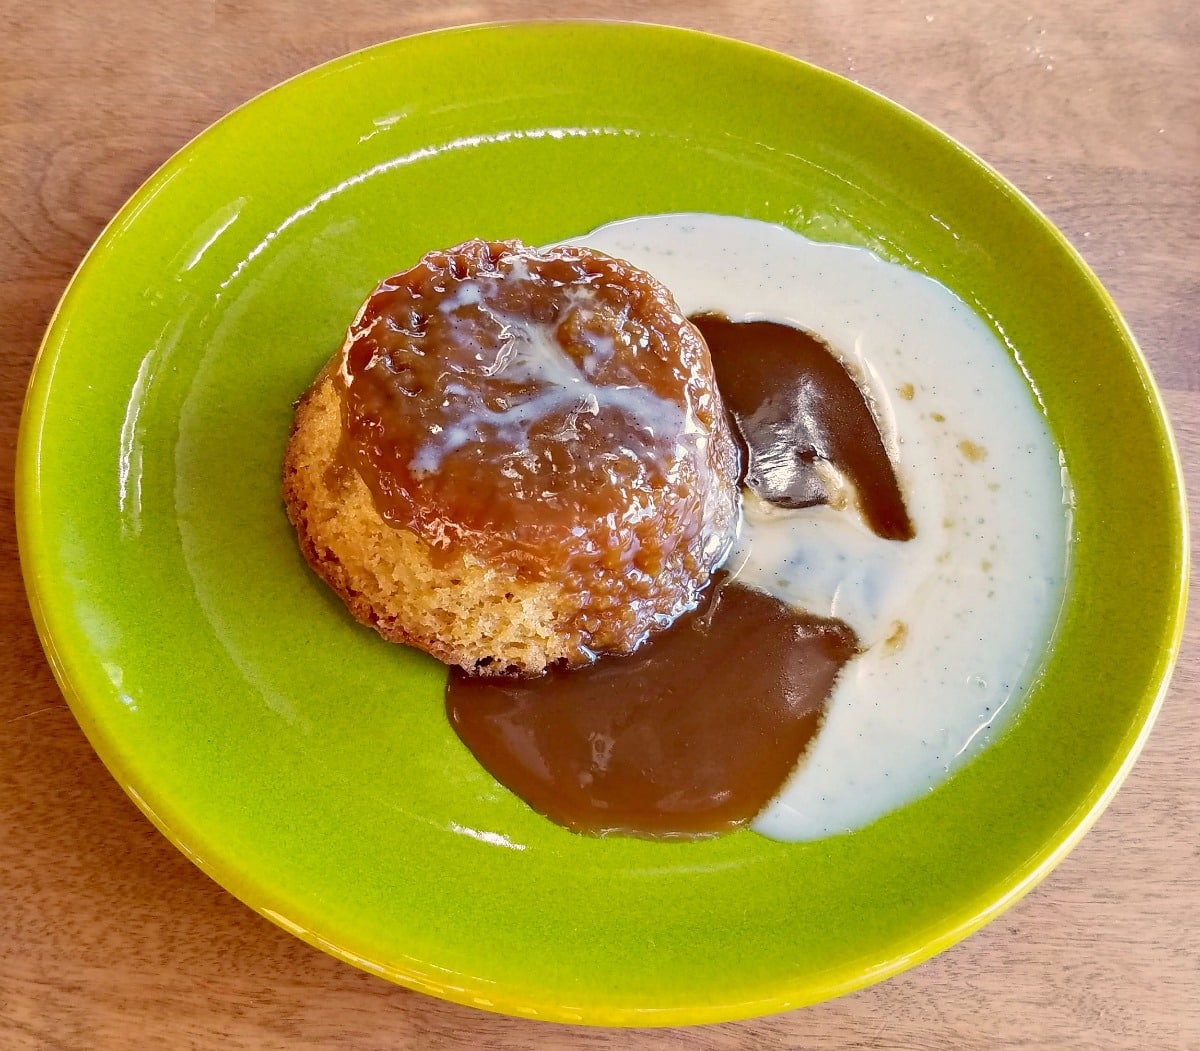 Steamed Pudding Recipe – Gooey Toffee Pudding with Bourbon Vanilla Creme Anglaise